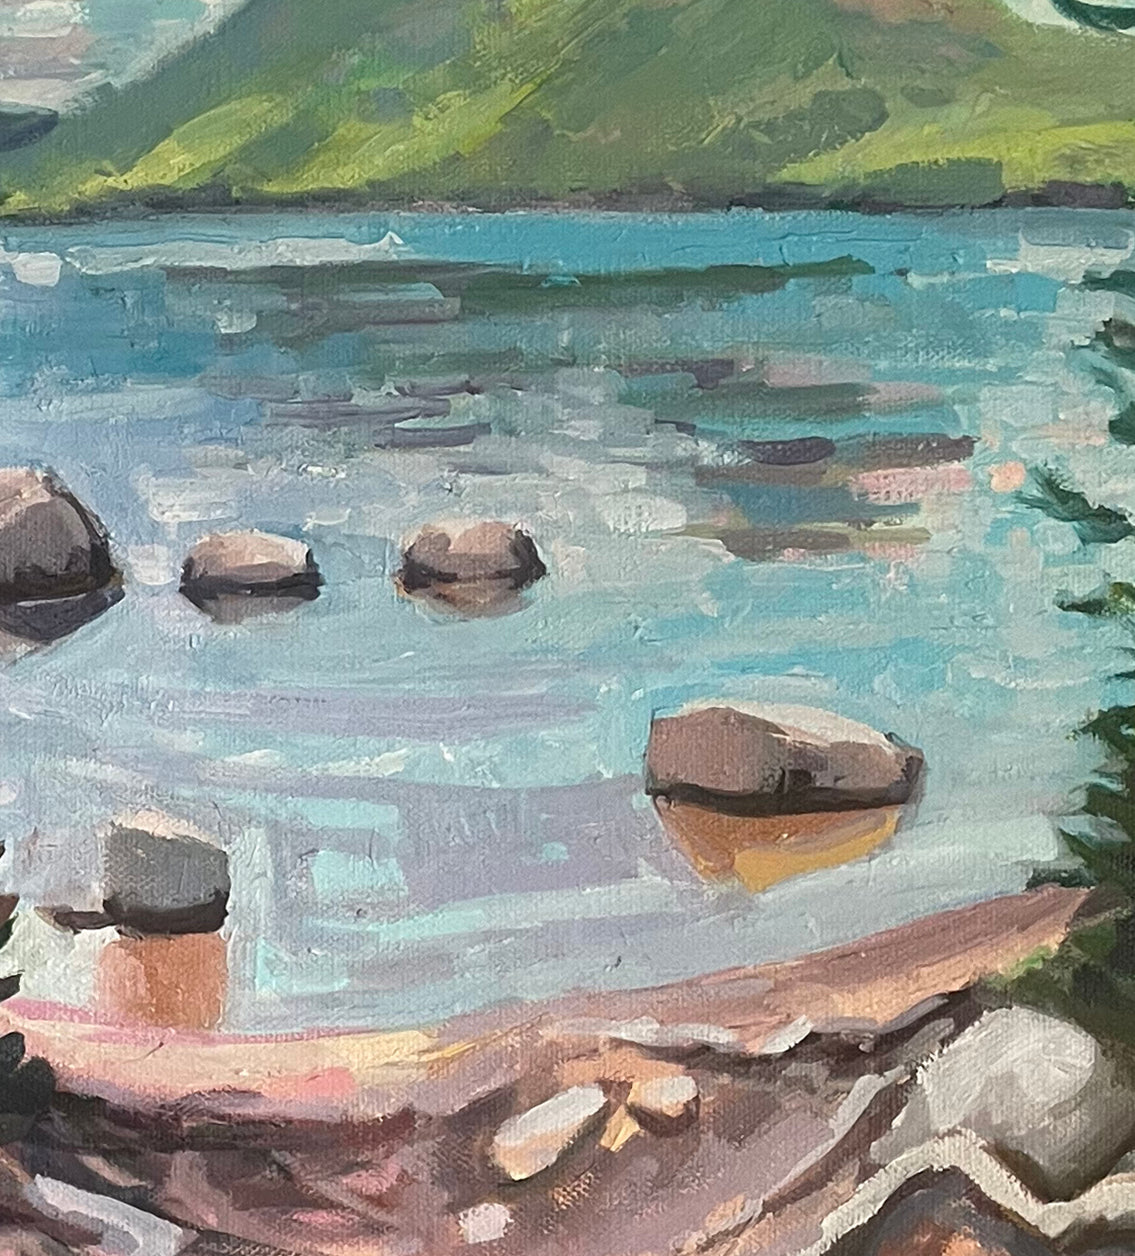 Afternoon at Jordan Pond, 18 x 24 inches